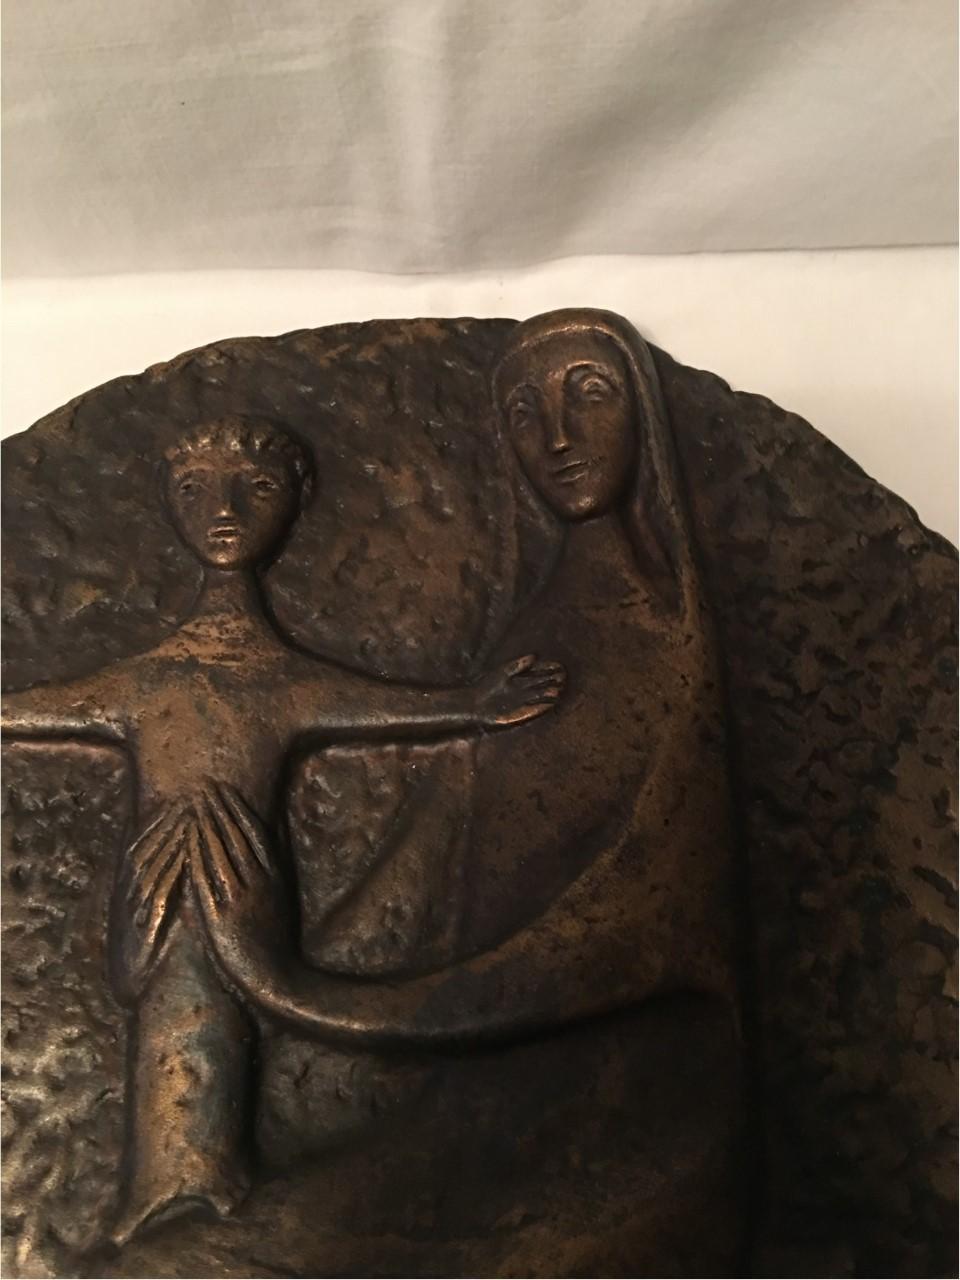 Inscribed with the designer initials of HB this lovely bronze plaque of virgin Mary with the Christ Child from Germany midcentury.